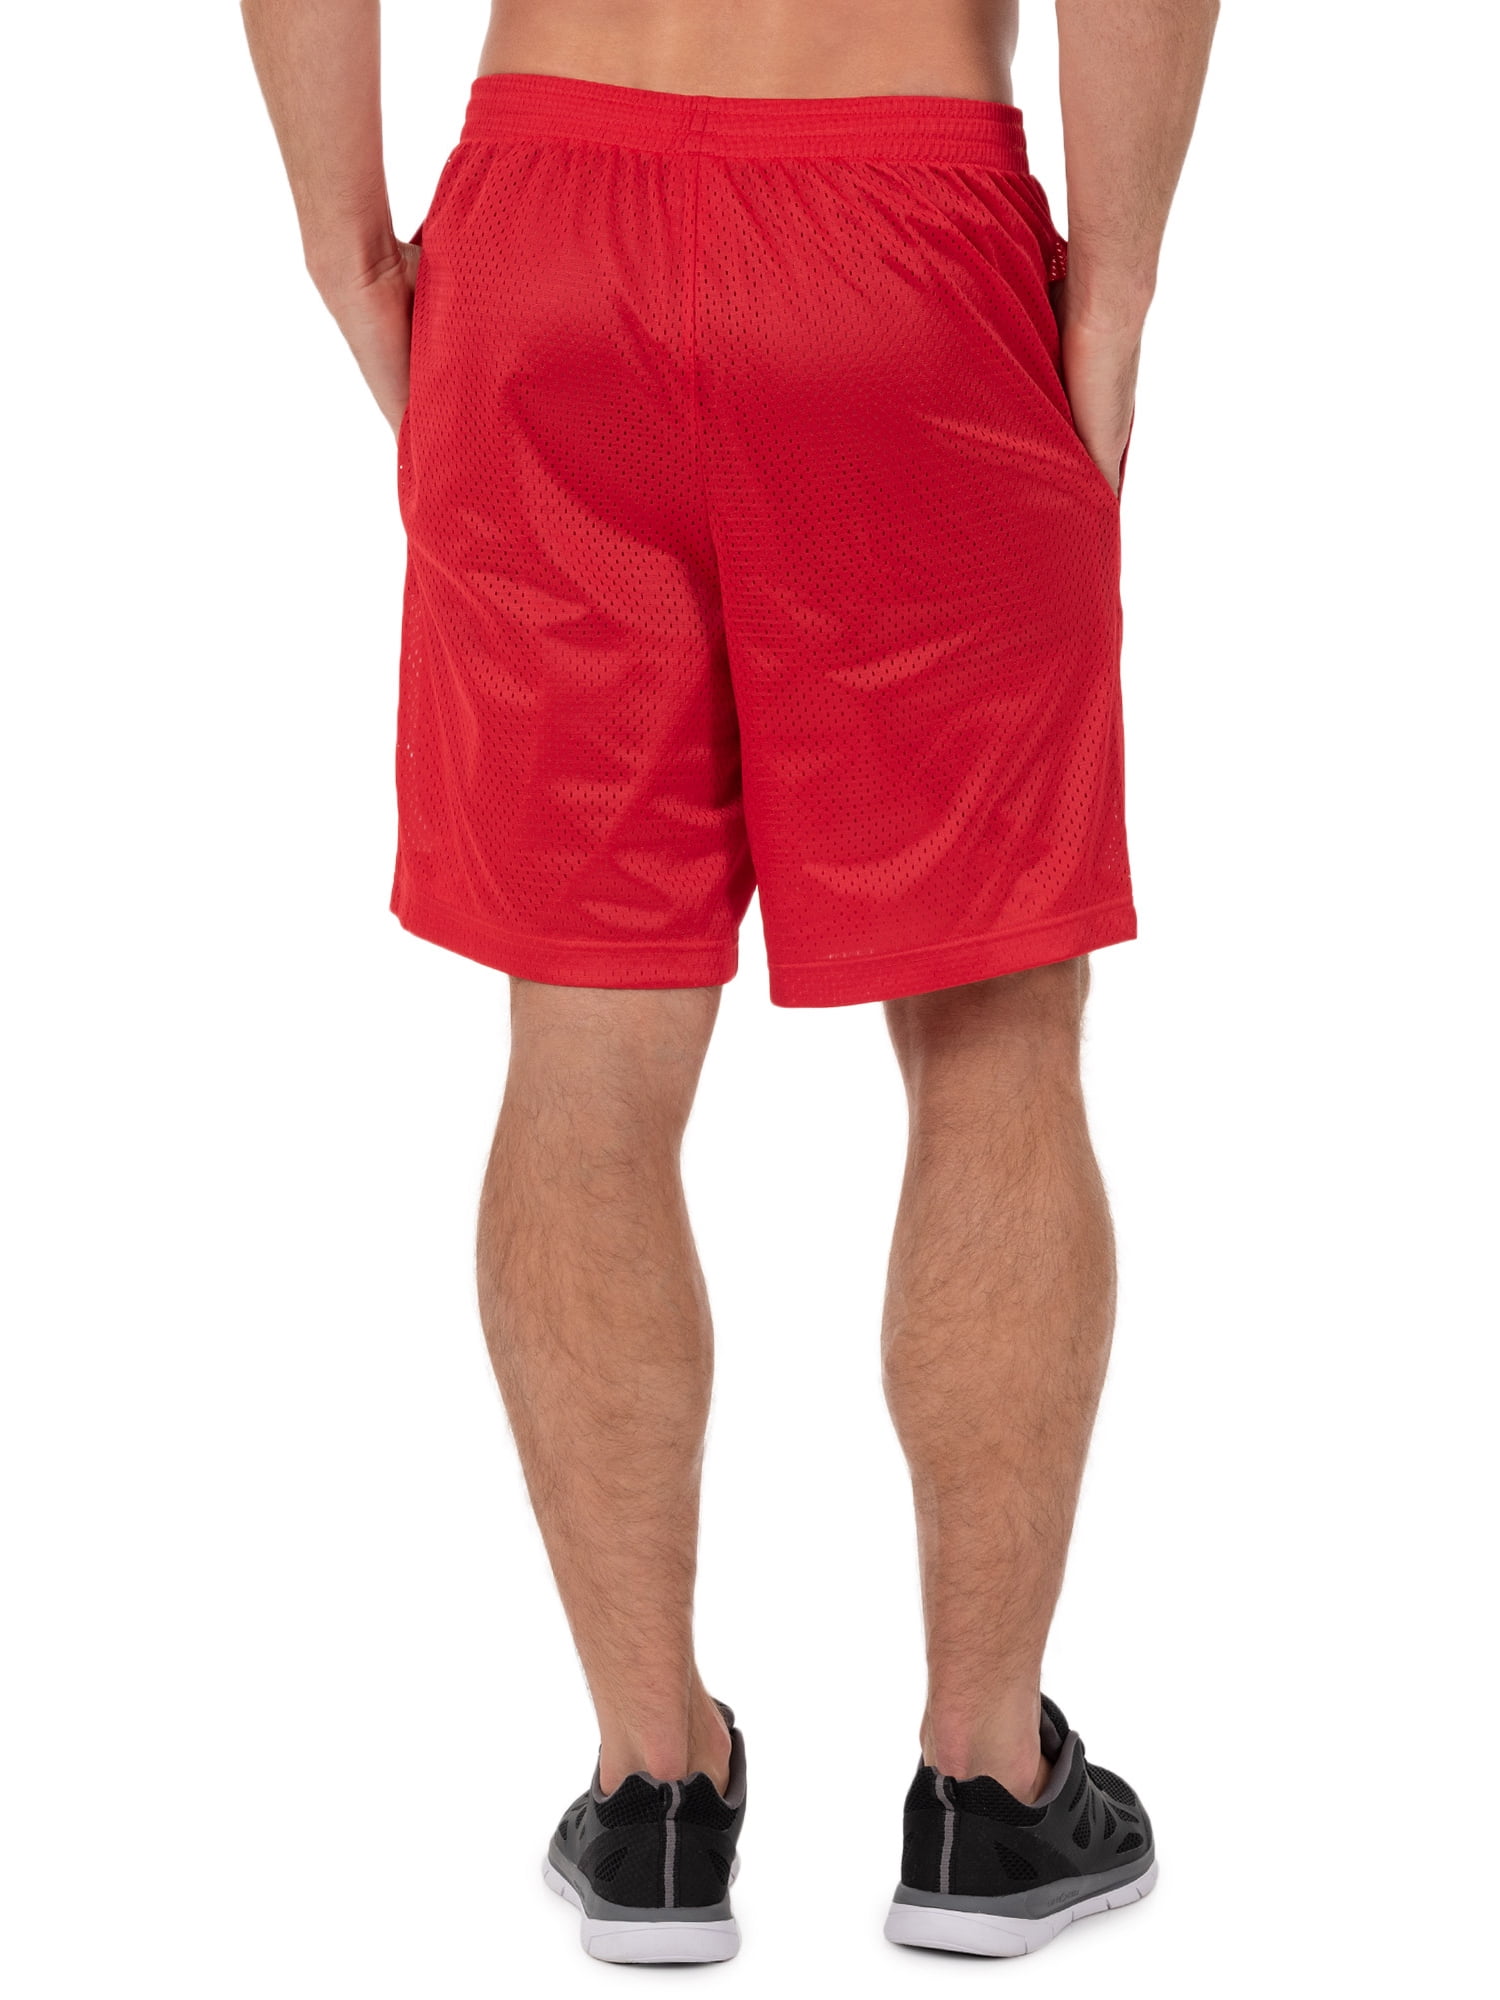 Athletic Works Men's 8 Active Ricehole Mesh Shorts, 2-Pack, up to 3XL 